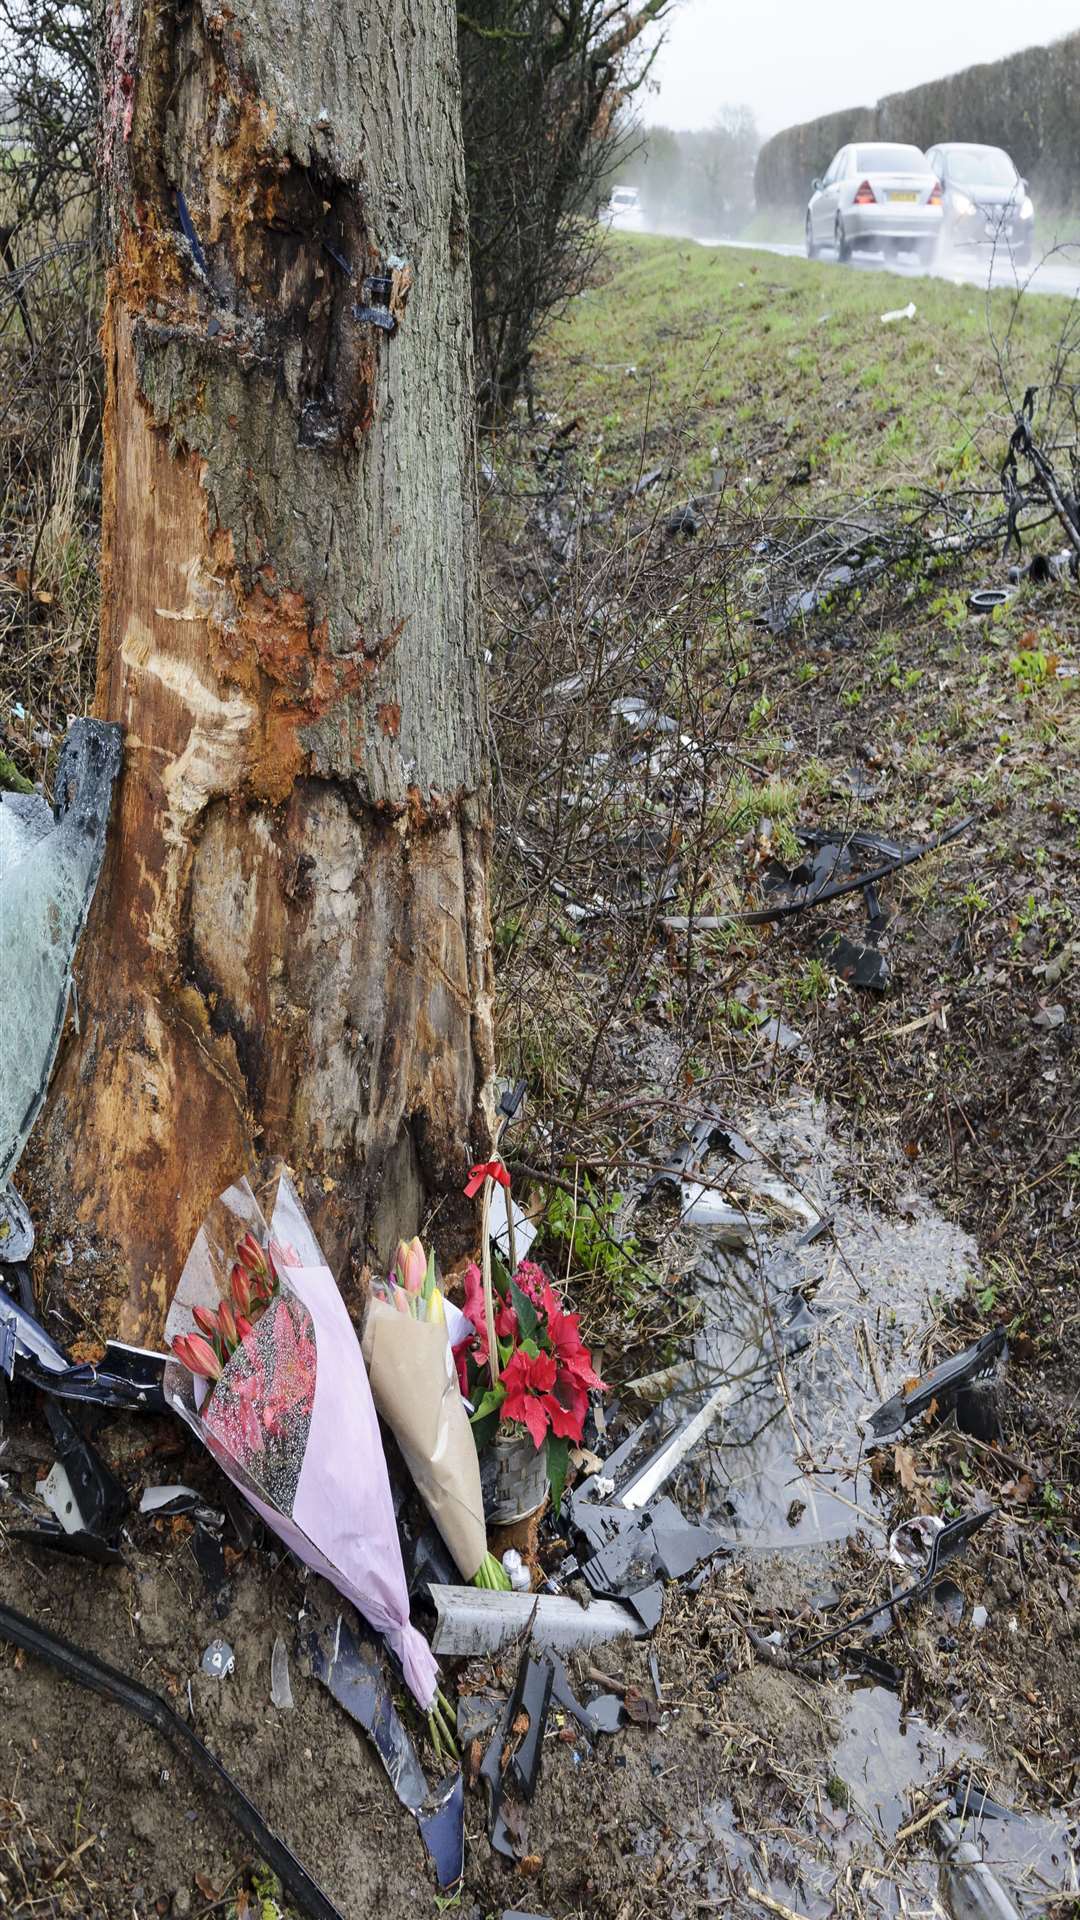 Floral tributes left at the scene of the fatal crash